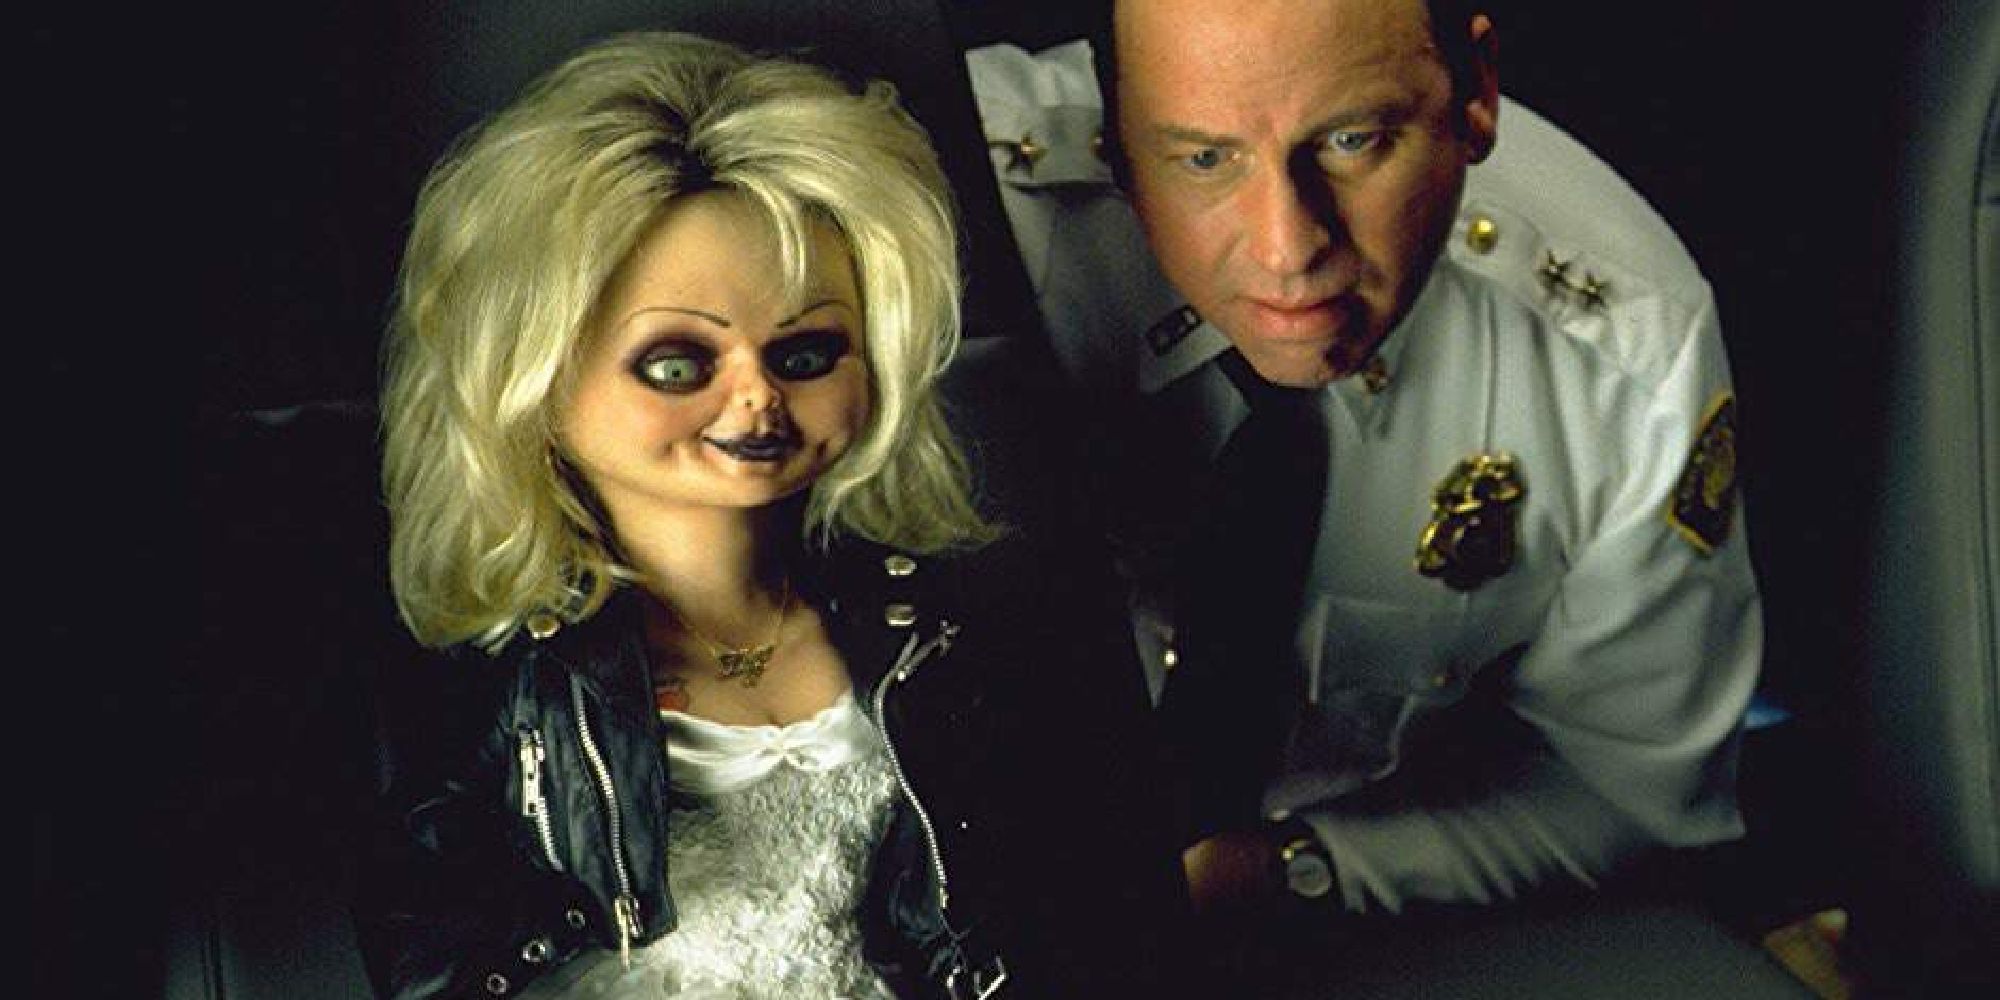 Tiffany Valentine in doll form in Bride of Chucky